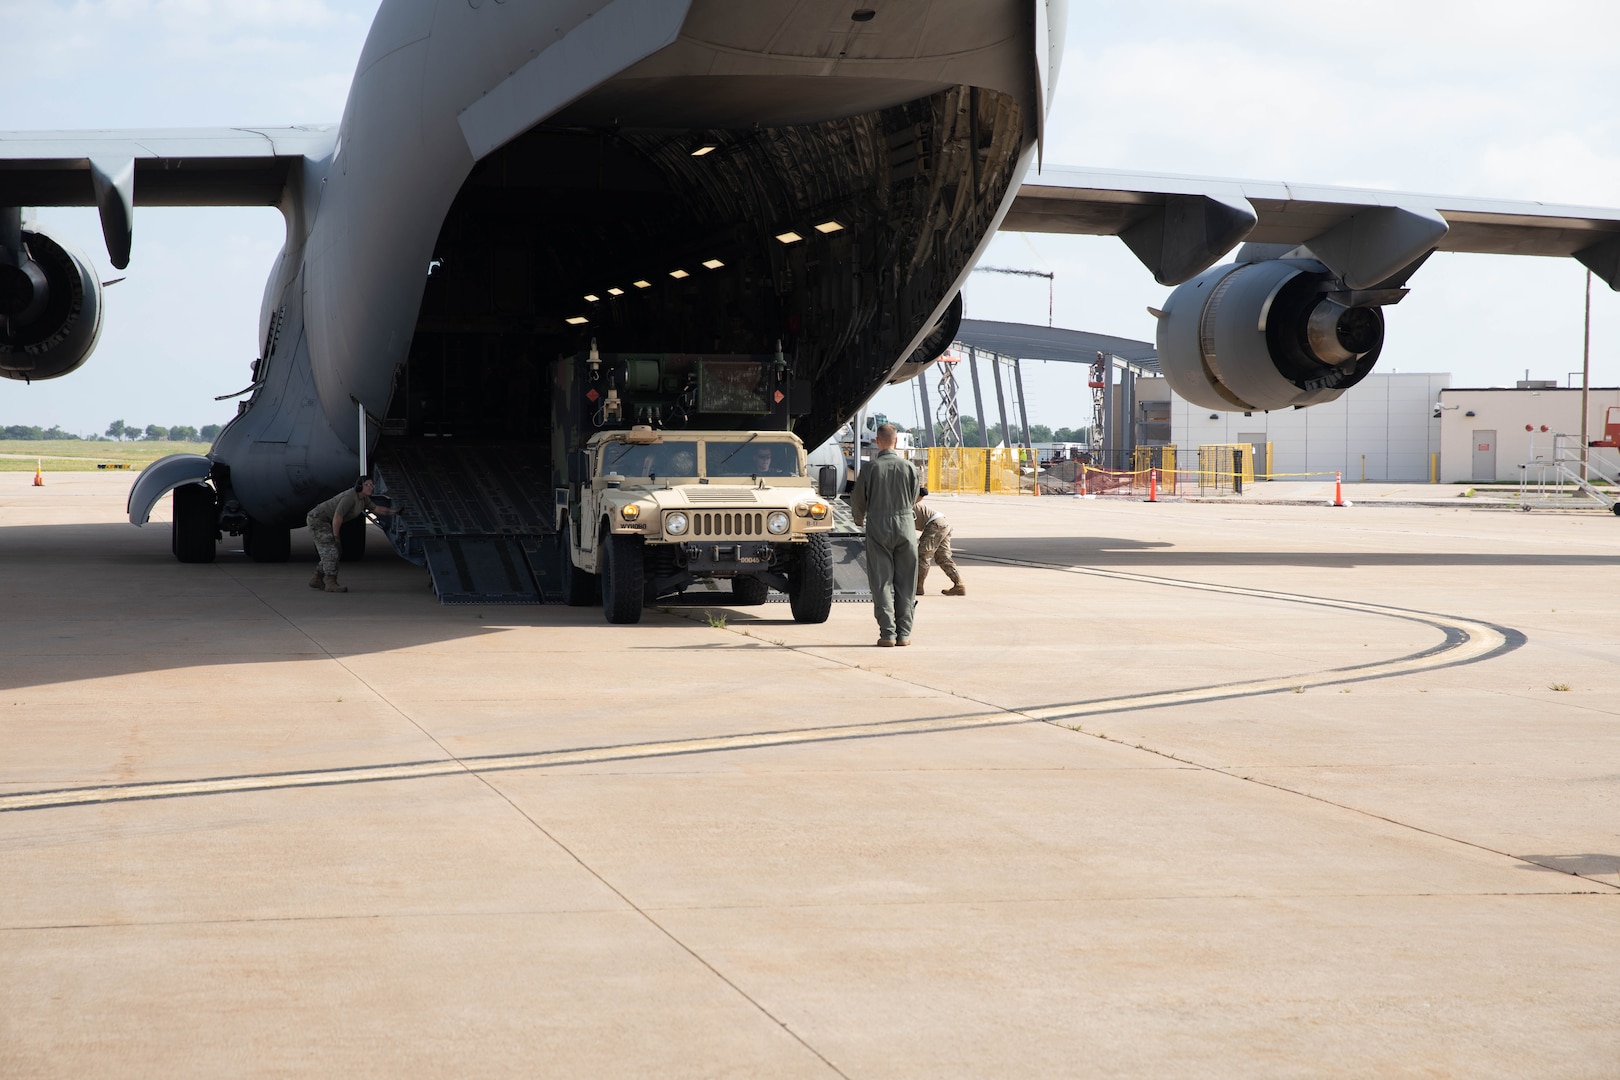 Oklahoma Army National Guard Soldiers with 1st Battalion,158th Field Artillery Regiment, 45th Field Artillery Brigade, load a Humvee carrying a Fire Direction Center onto a C-17 aircraft in preparation for transport at the Lawton-Fort Sill Regional Airport June 14, 2023. The Soldiers were loading the HIMARS into C-17 aircraft assigned to the 97th Air Mobility Wing out of Altus Air Force Base as part of a joint exercise to practice the Soldiers’ and Airmen’s skills to rapidly and safely transport the launchers and equipment across large distances. (Oklahoma Army National Guard photo by Spc. Caleb Stone)